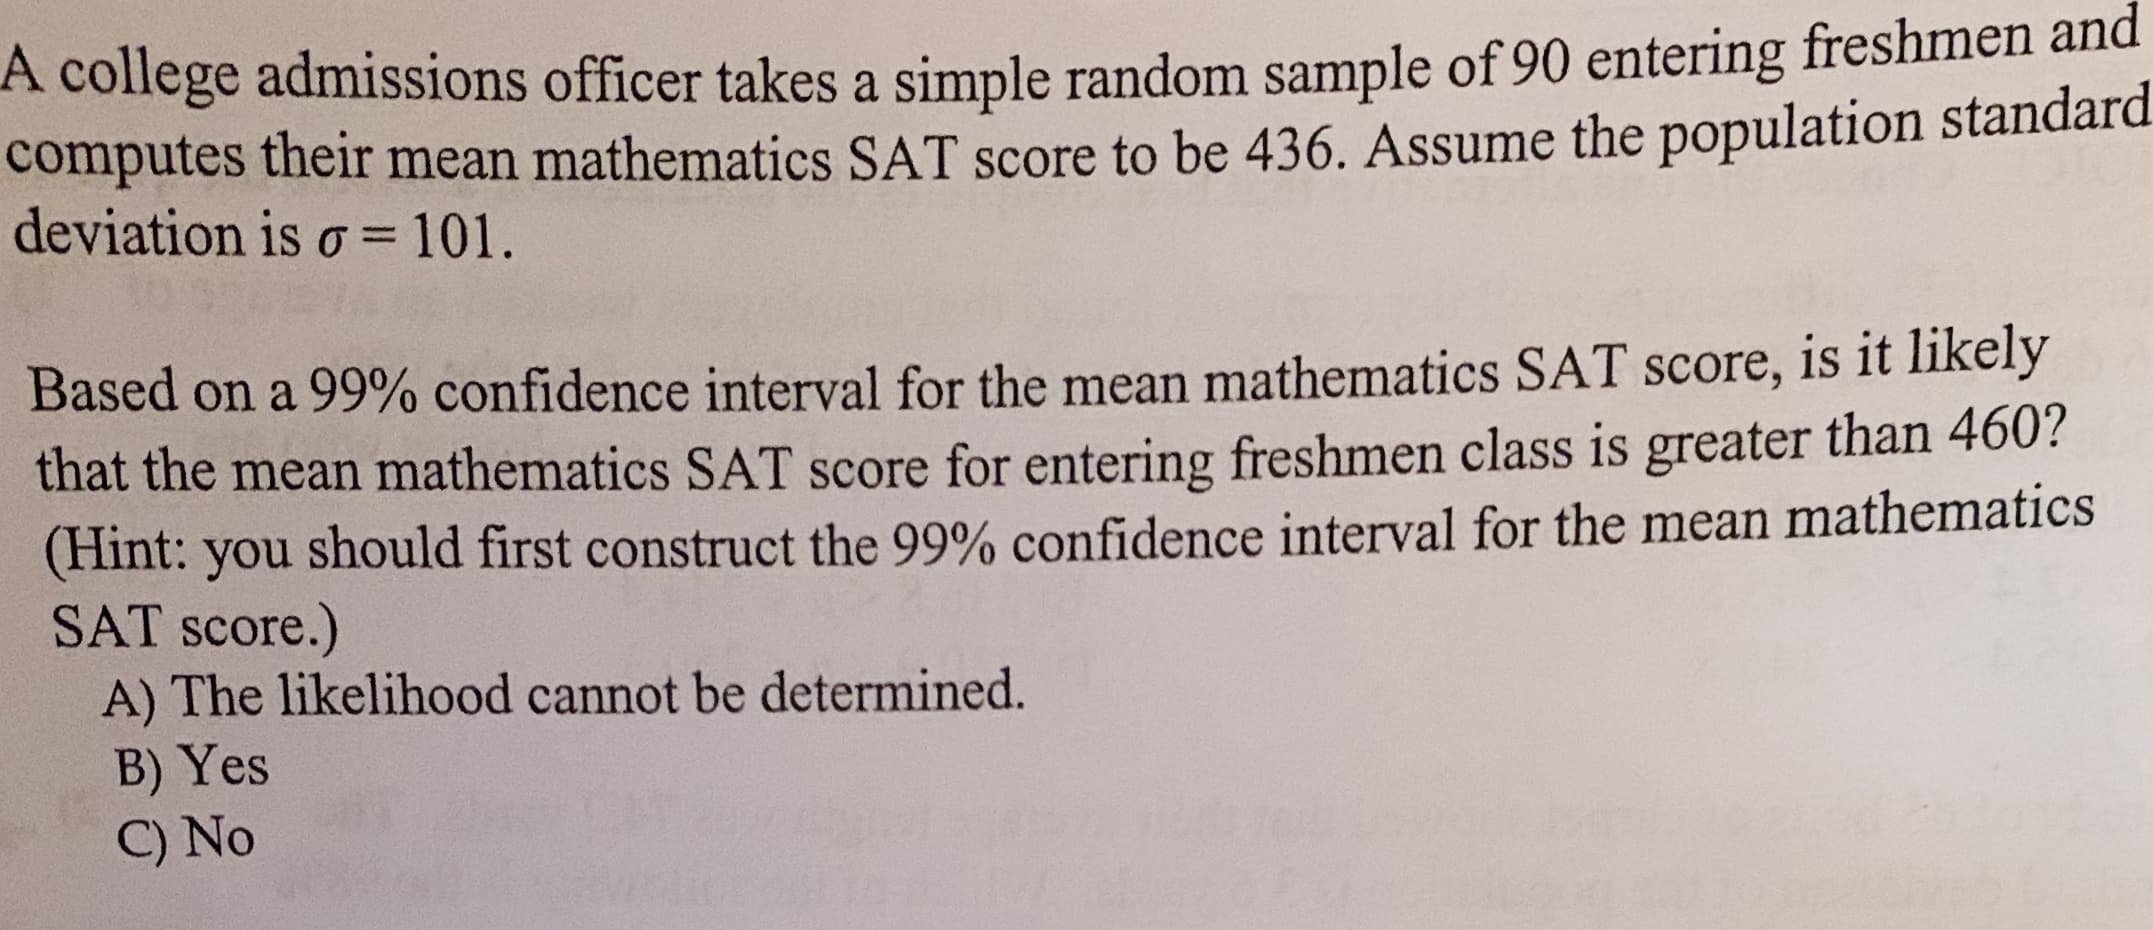 A college admissions officer takes a simple random sample of 90 entering freshmen and
computes their mean mathematics SAT score to be 436. Assume the population standard.
deviation is o 101.
Based on a 99% confidence interval for the mean mathematics SAT score, is it likely
that the mean mathematics SAT score for entering freshmen class is greater than 460?
(Hint: you
SAT score.)
A) The likelihood cannot be determined.
B) Yes
C) No
should first construct the 99% confidence interval for the mean mathematics
